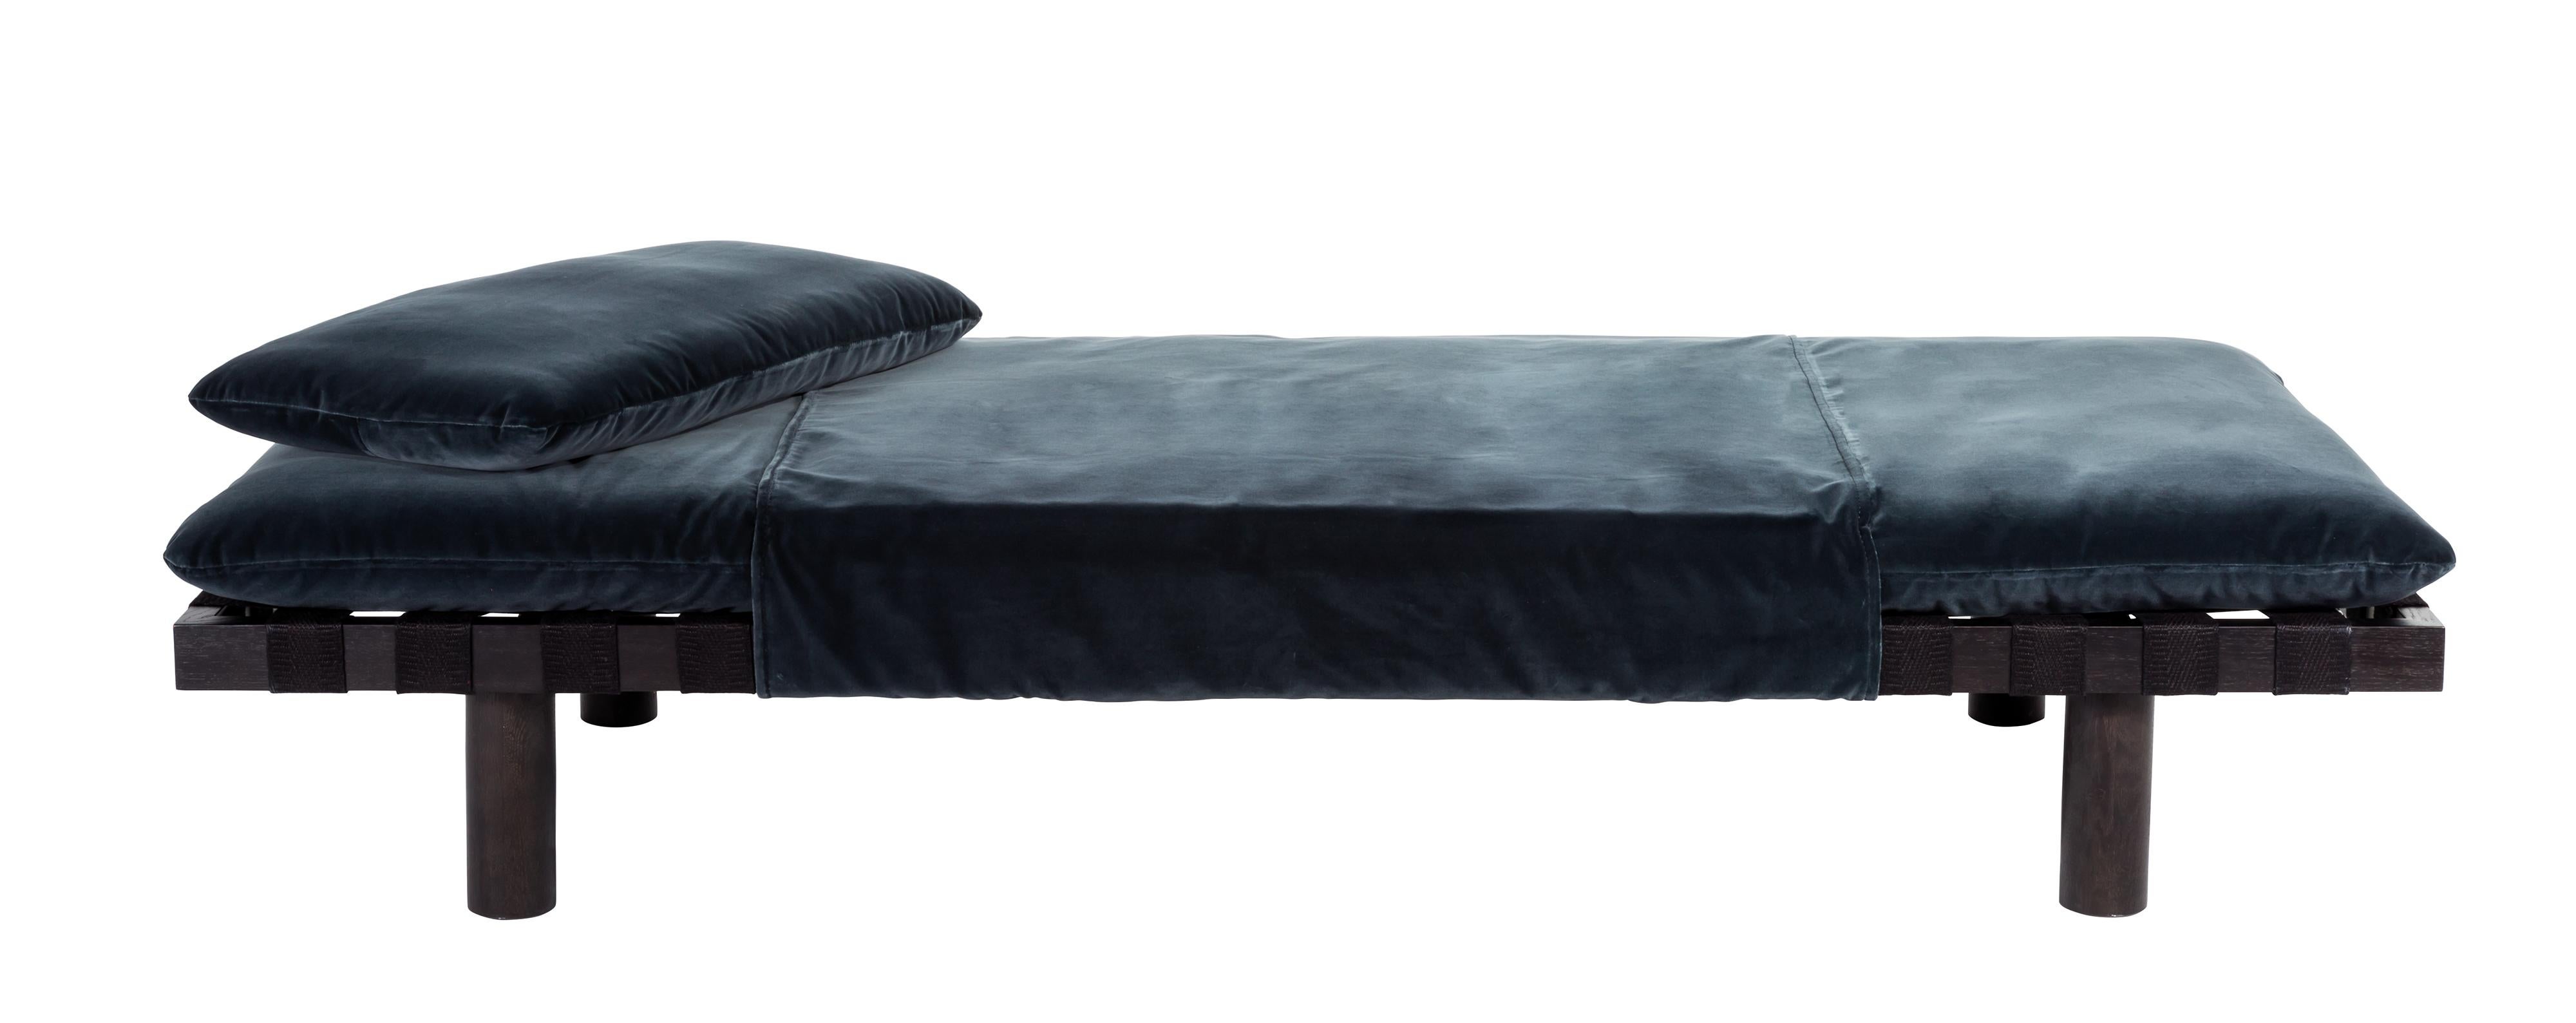 Pallet dark grey velvet black day bed by Pulpo
Dimensions: D200 x W80 x H29 cm.
Materials: fabric/leather, foam and wood.

Also available in different colours and finishes. 

Thinking about the first significant furniture for pulpo with the